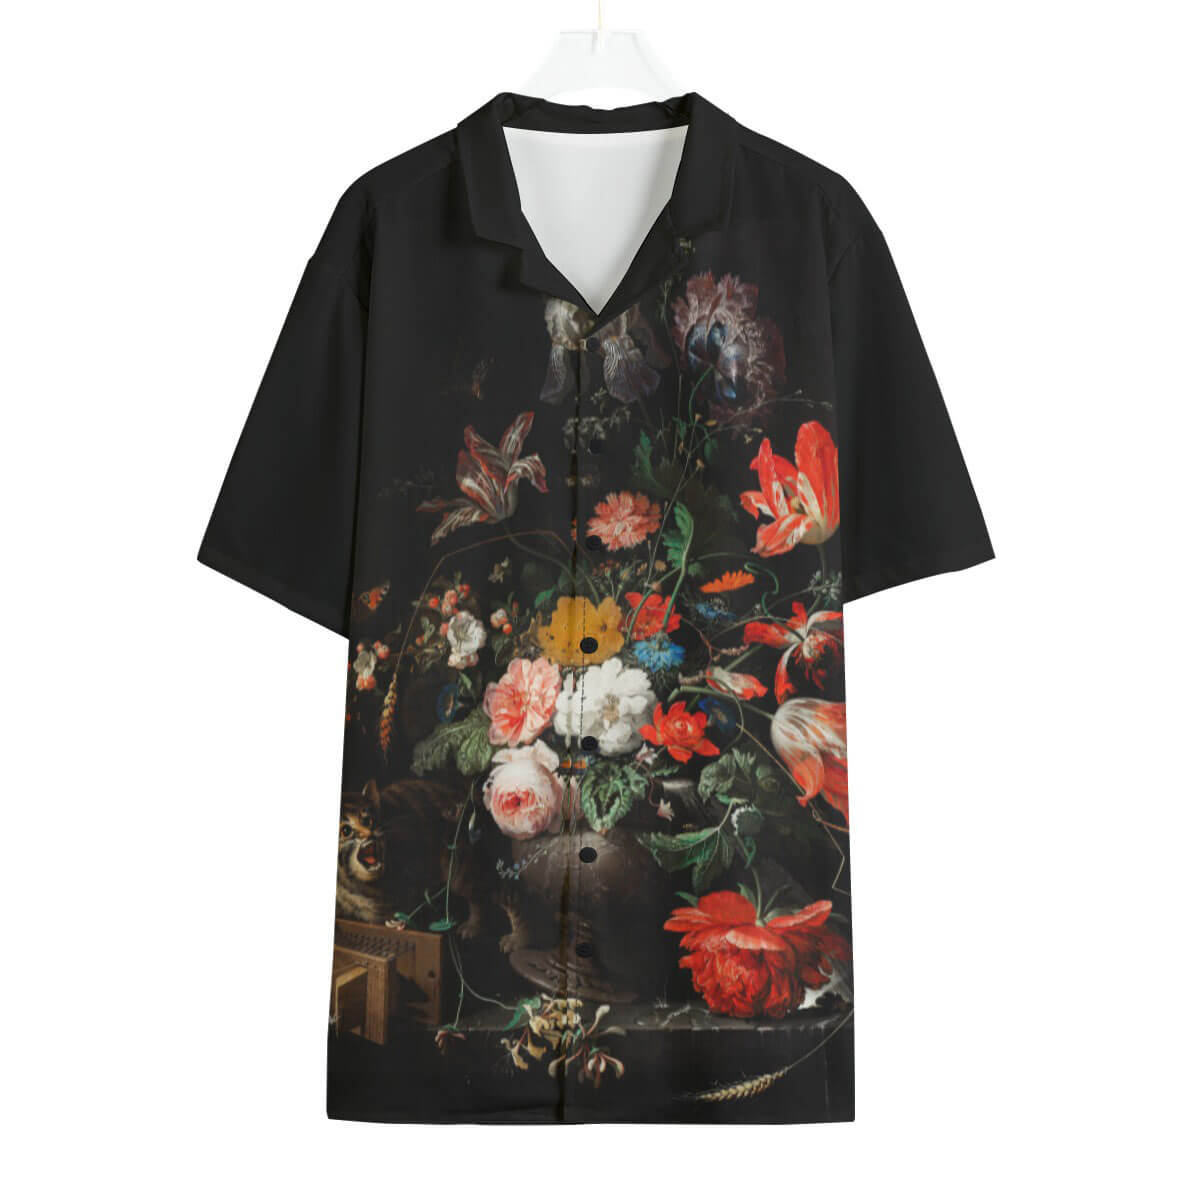 The Overturned Bouquet by Abraham Mignon Shirt worn by model in art gallery